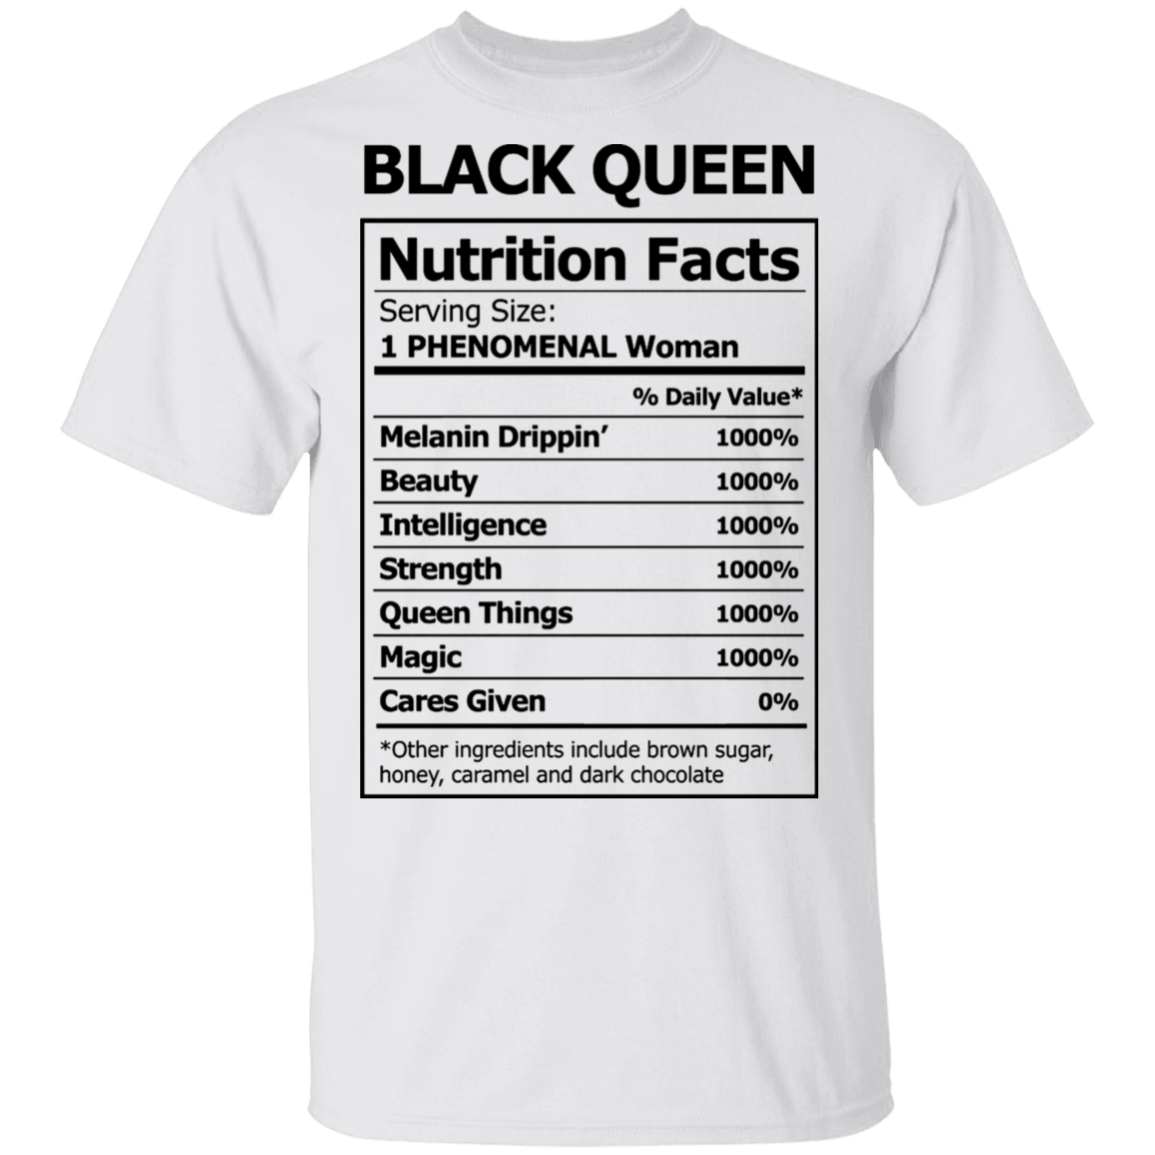 Phenomenal Woman Shirt Black Queen Nutrition Fact Afro American Feminist Clothing